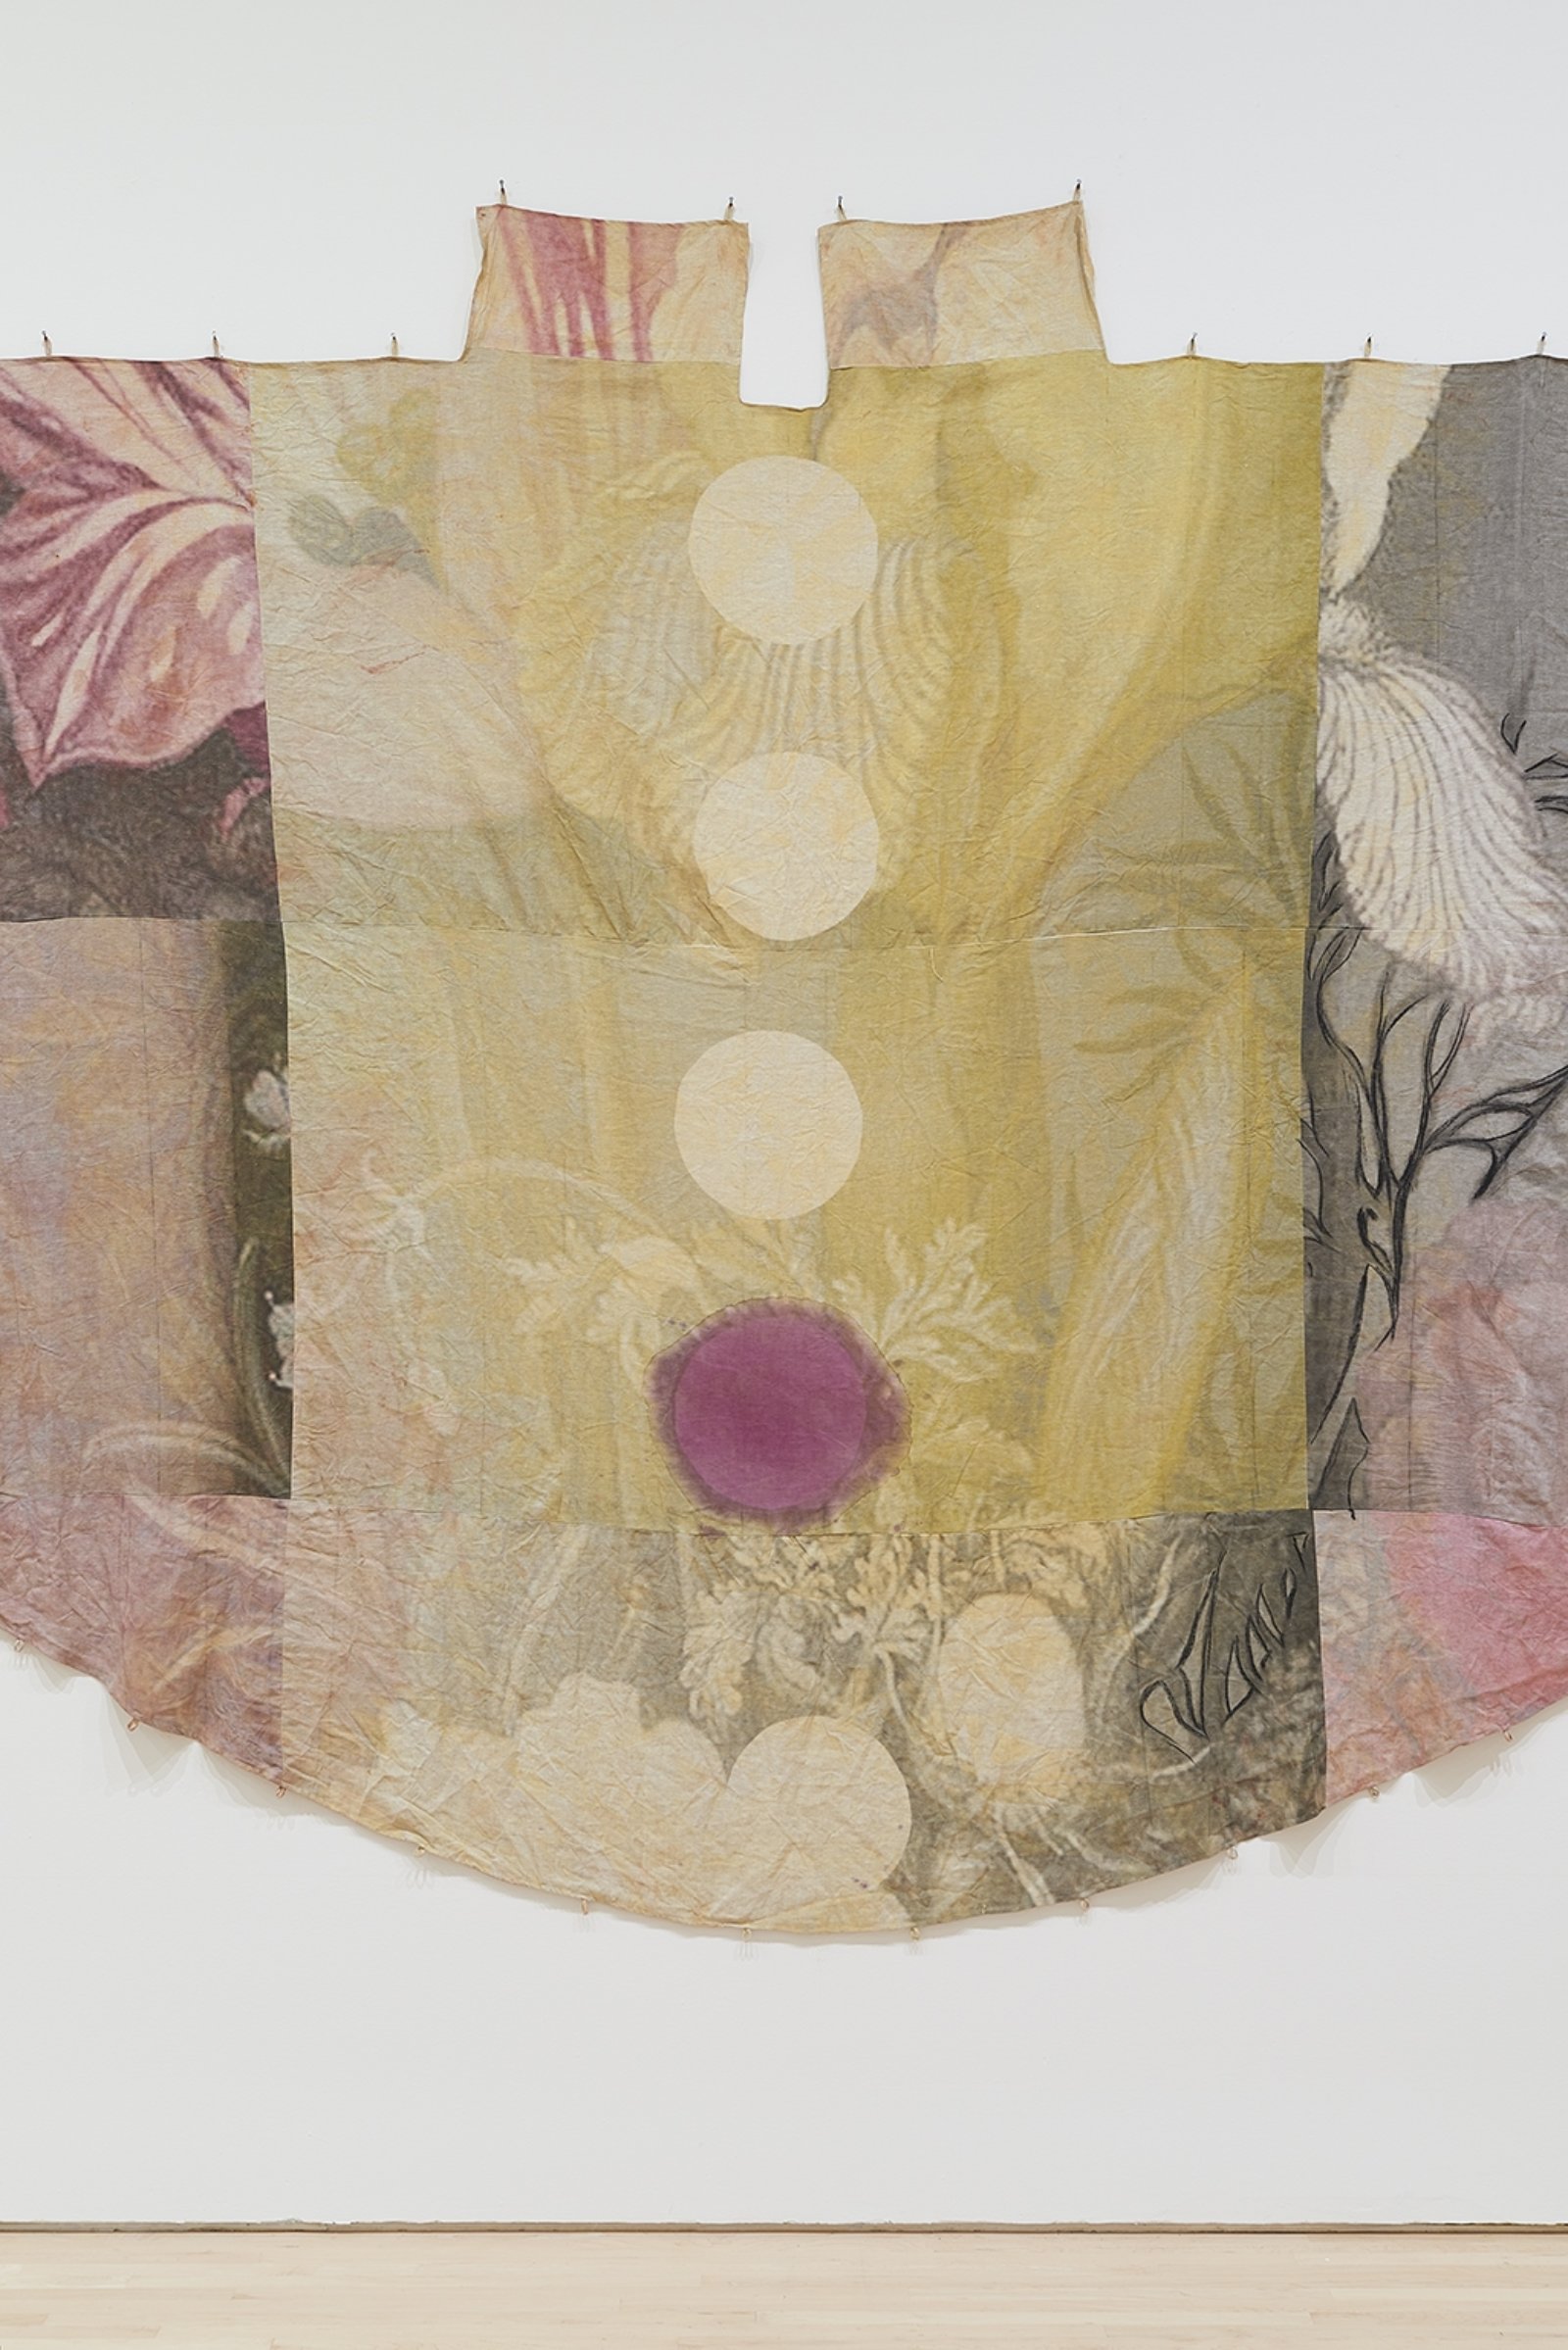 Duane Linklater, can the circle be unbroken 2 (detail), 2019, digital print on linen, iron red dye, cypress yellow ochre, blueberry extract, charcoal, nails, 120 x 240 in. (305 x 610 cm). Installation view, SOFT POWER, SF MOMA, San Francisco, USA, 2019